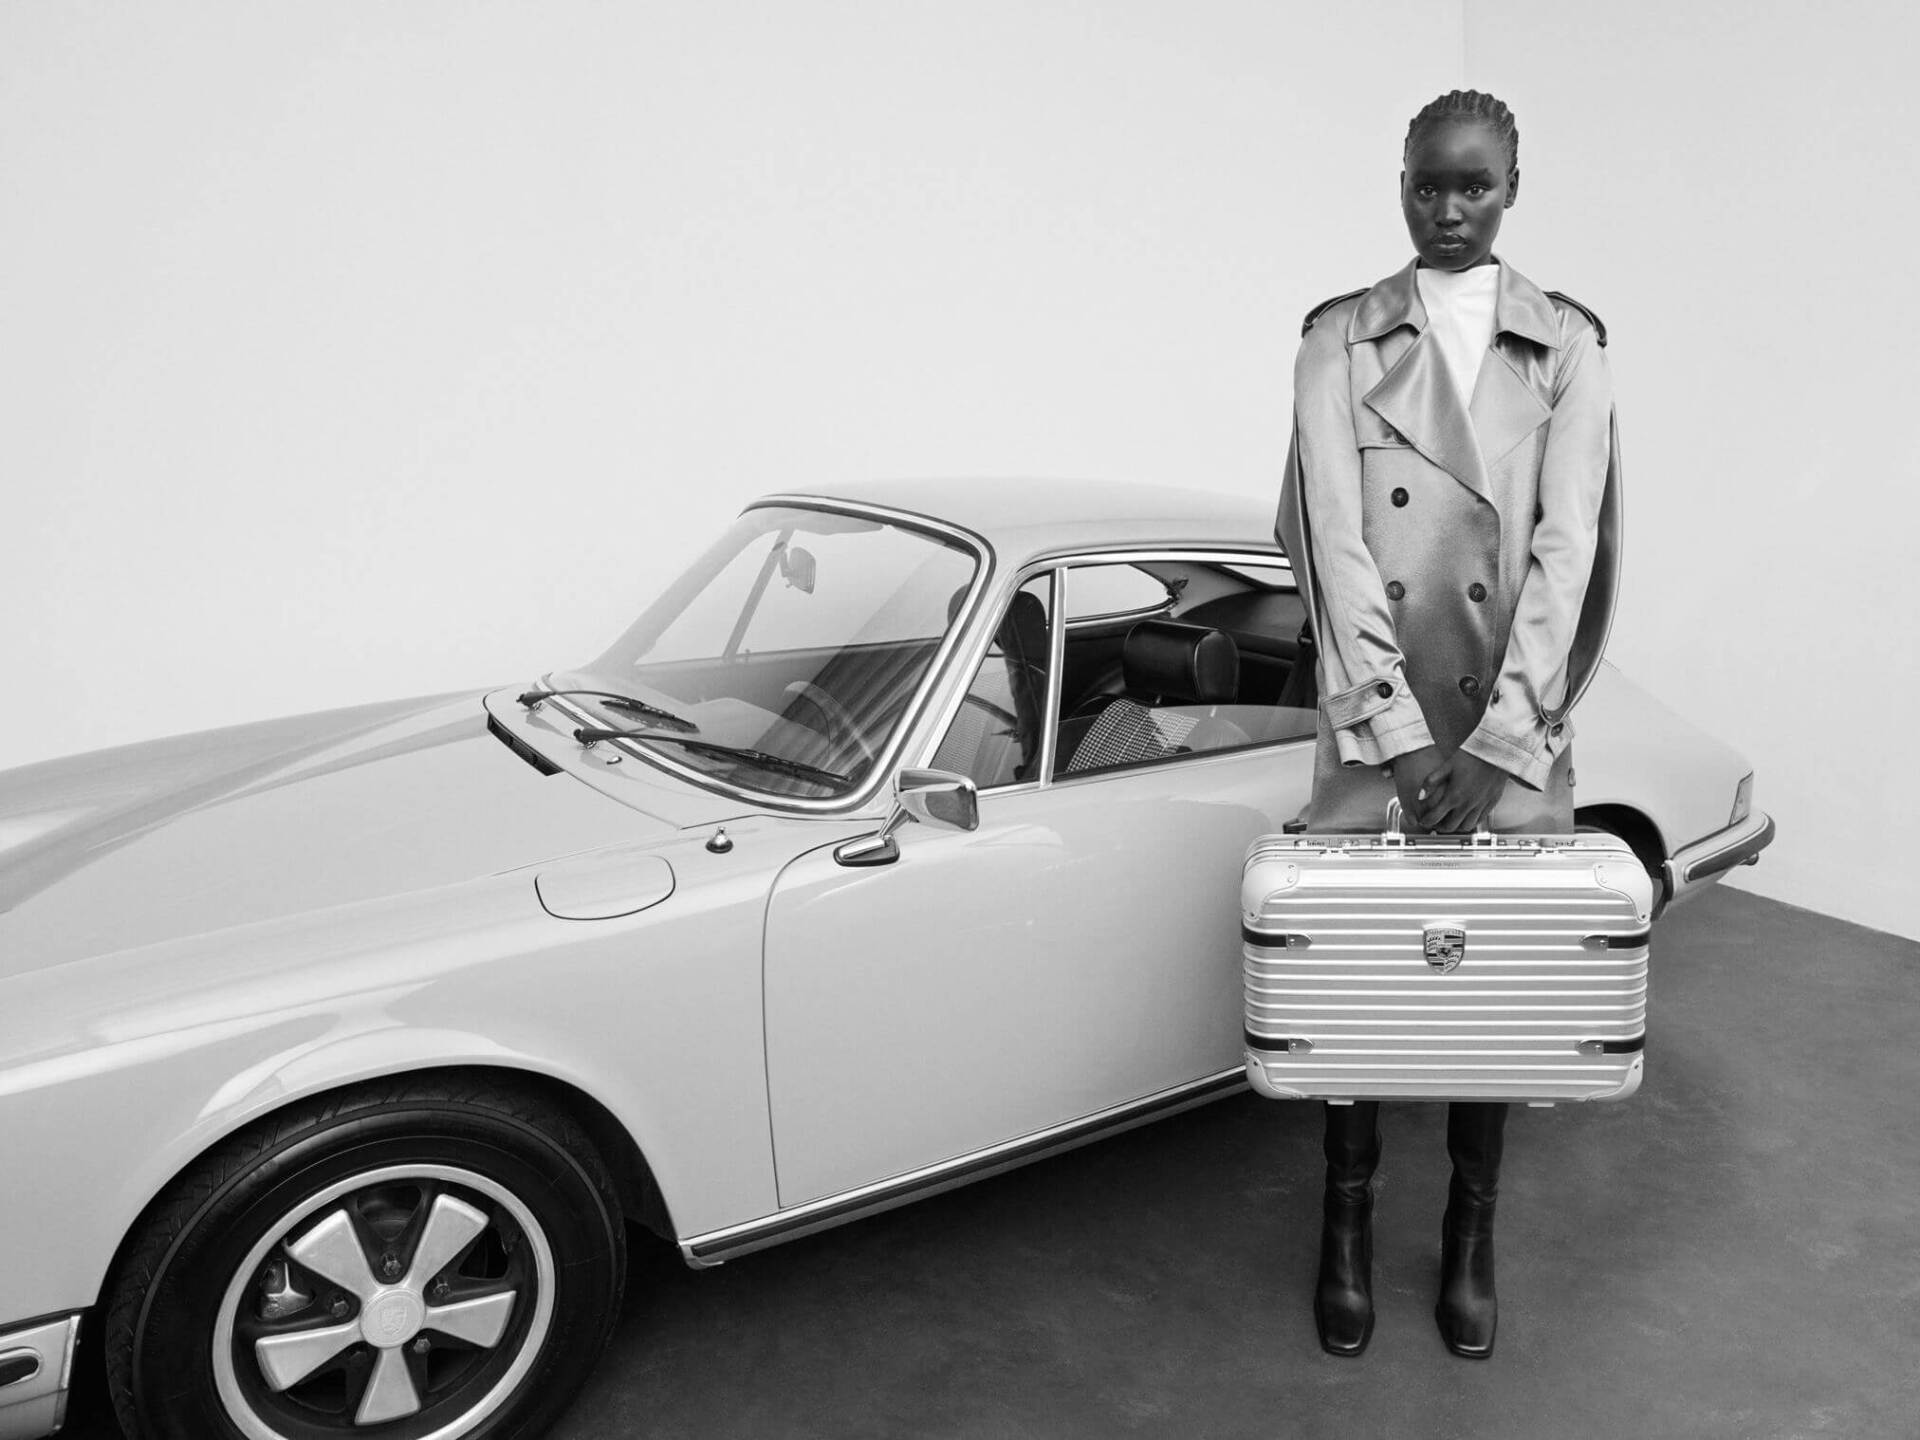 rimowa porsche collaboration suitcase black and white photo woman holding suitcase in front of porsche 911 car